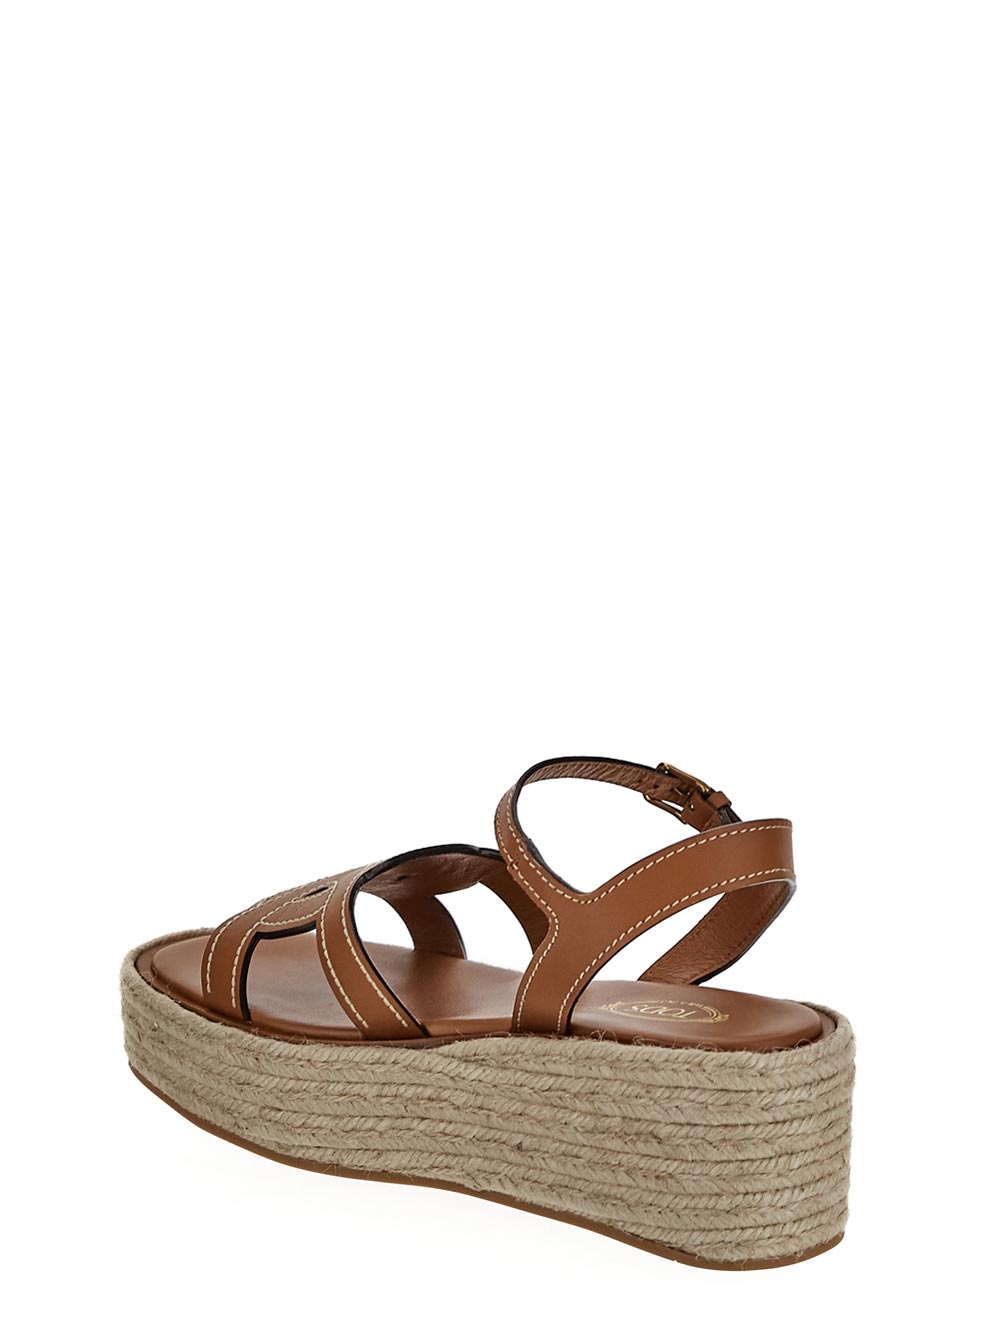 Tod'S Kate Wedge Sandals In Leather